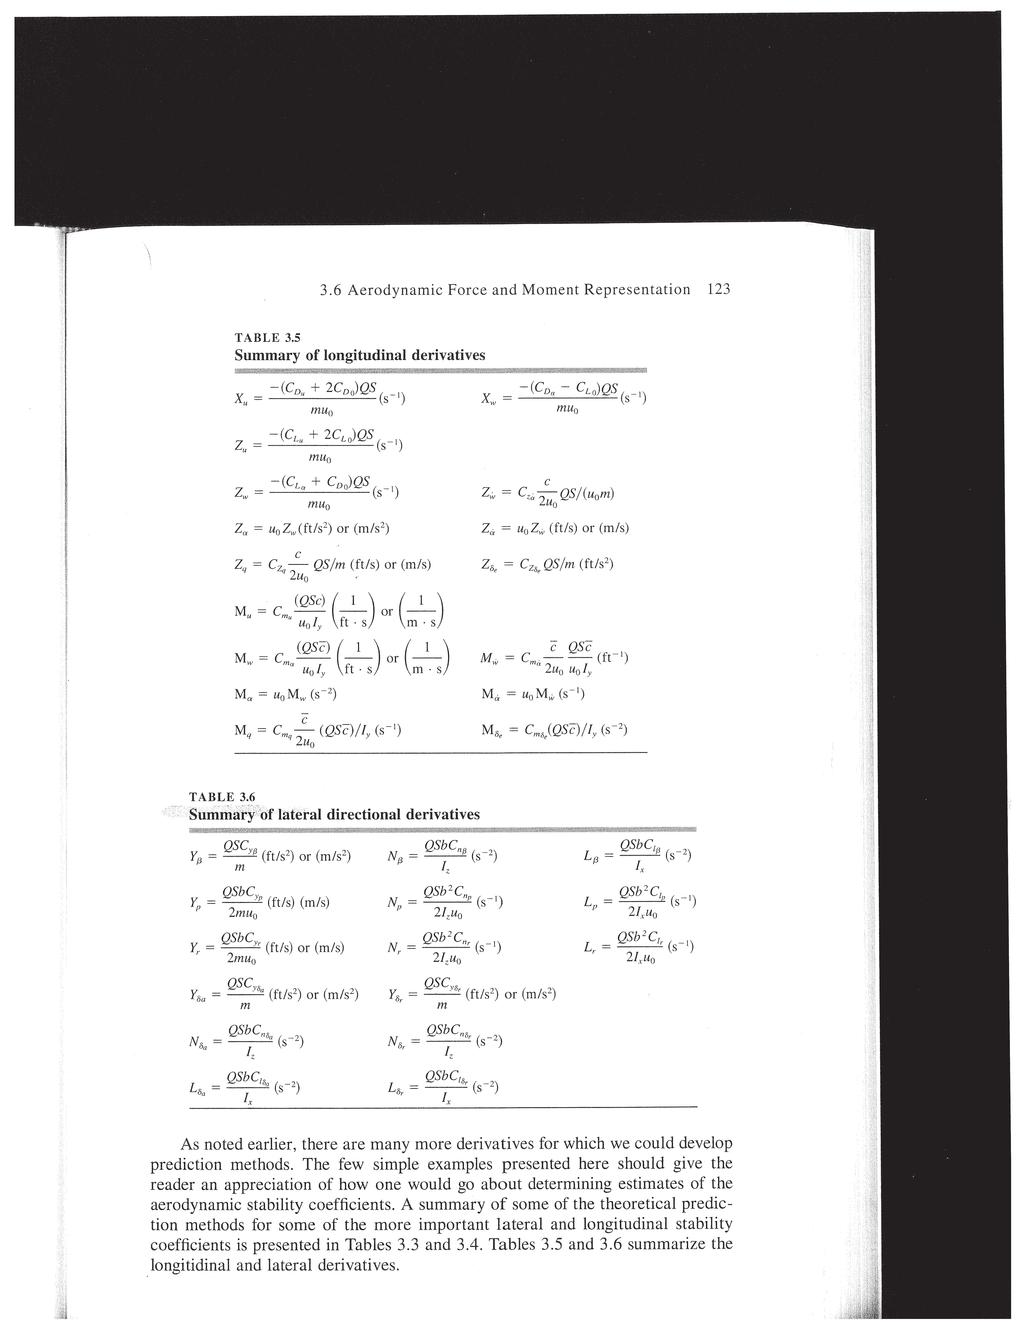 Force Coefficients Force/Moment Coefficients can be